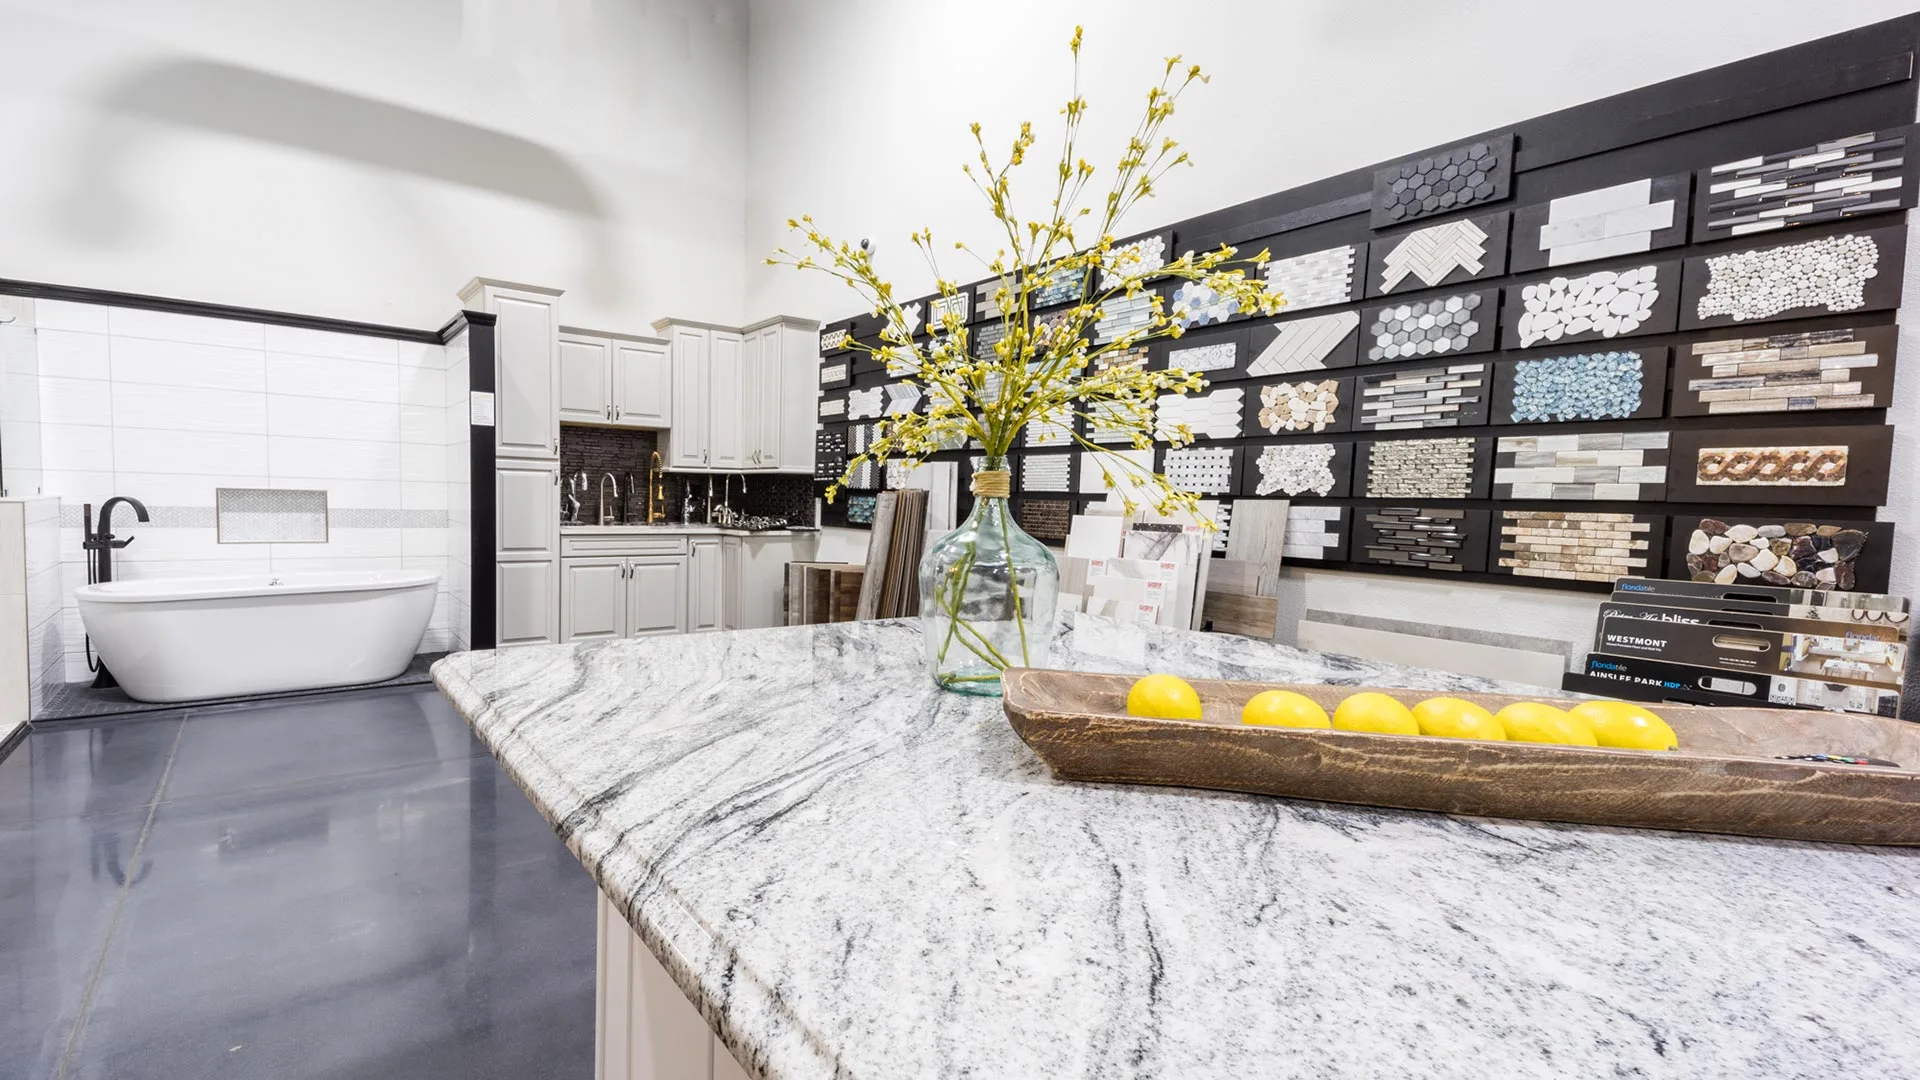 Home Improvement Stores Can’t Match These Remodeling Showroom Perks